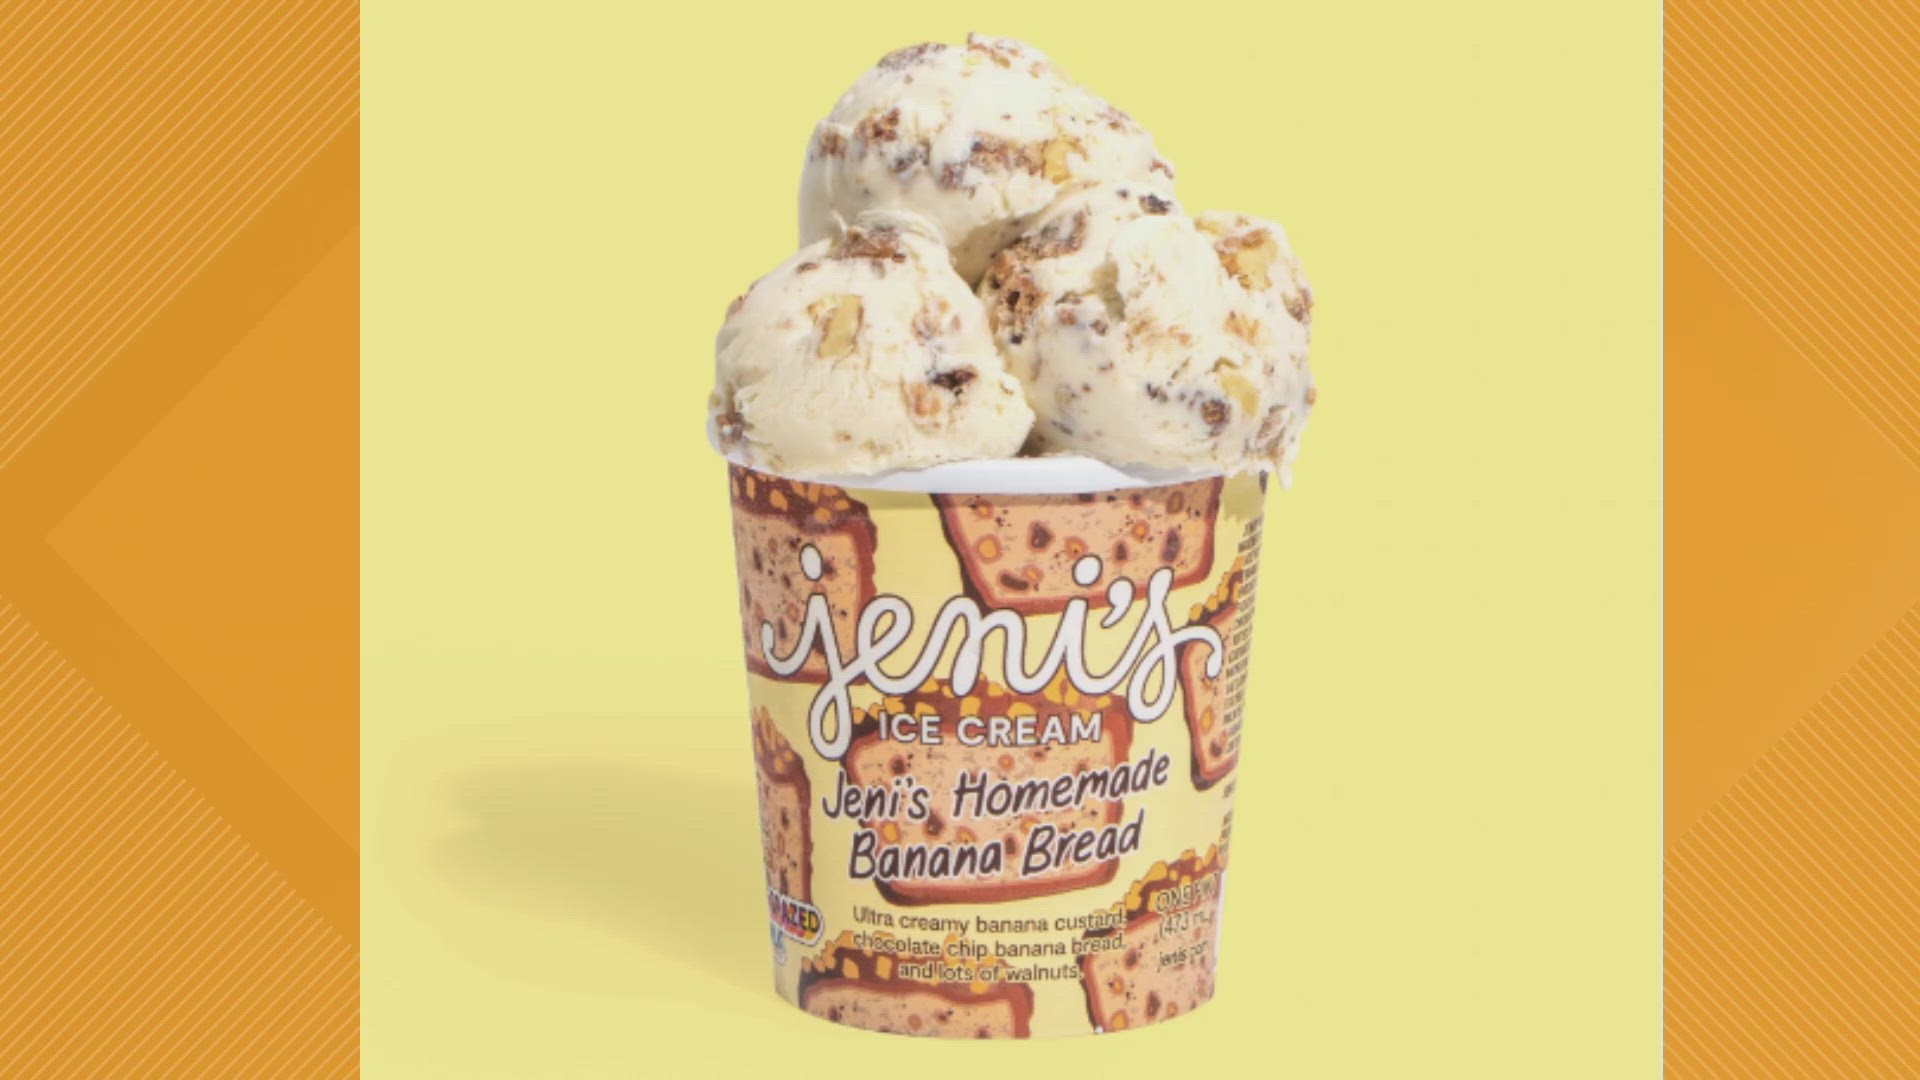 Founder Jeni Britton turned her homemade banana bread recipe into a new limited-edition ice cream flavor.